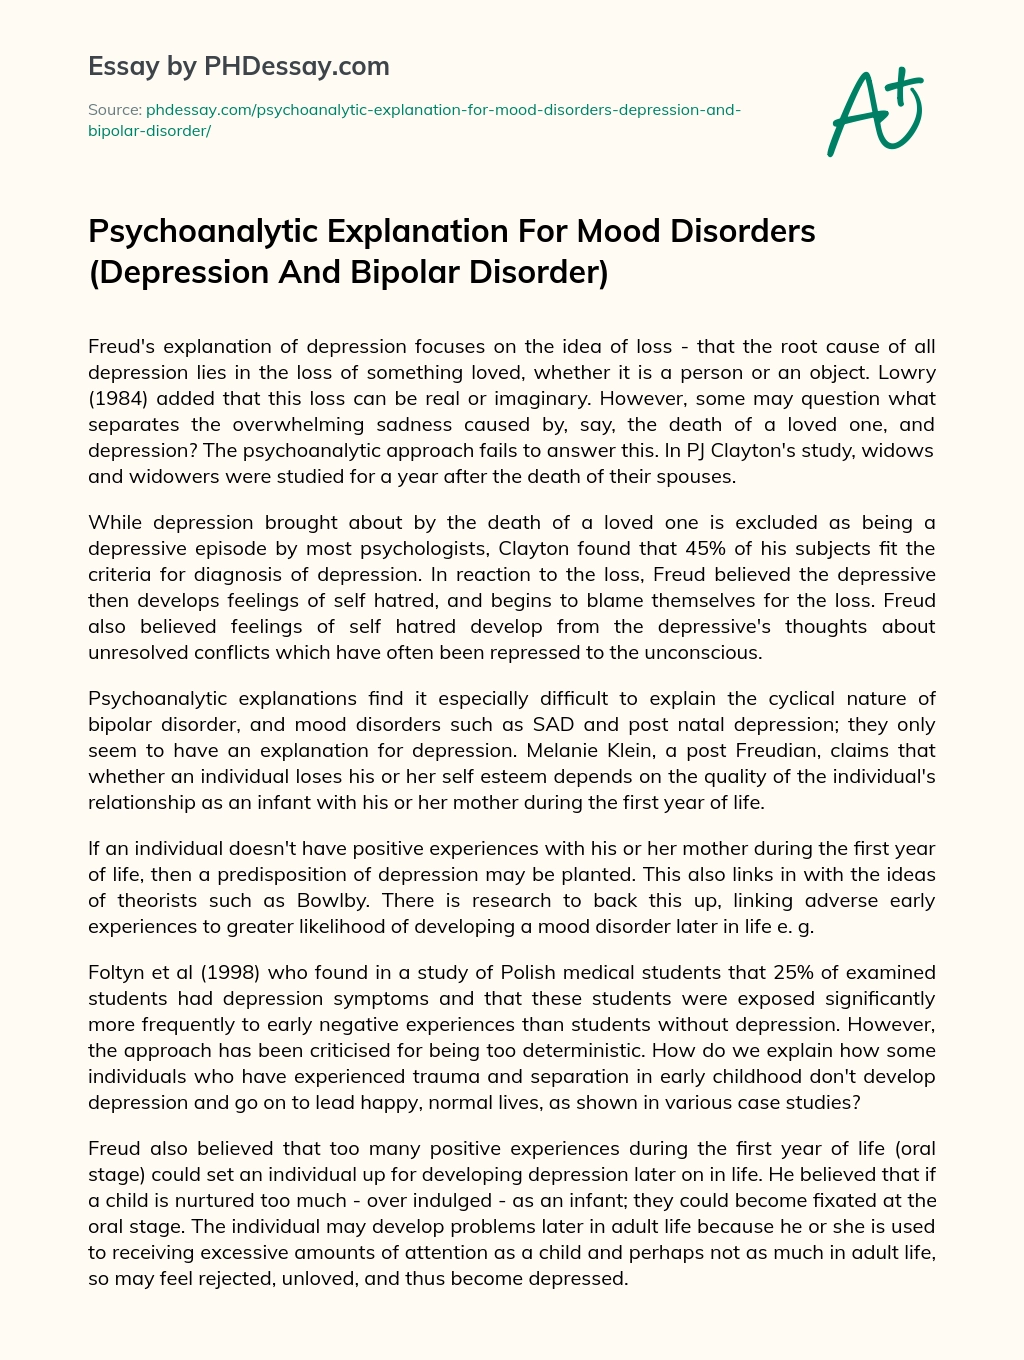 Psychoanalytic Explanation For Mood Disorders (Depression And Bipolar Disorder) essay